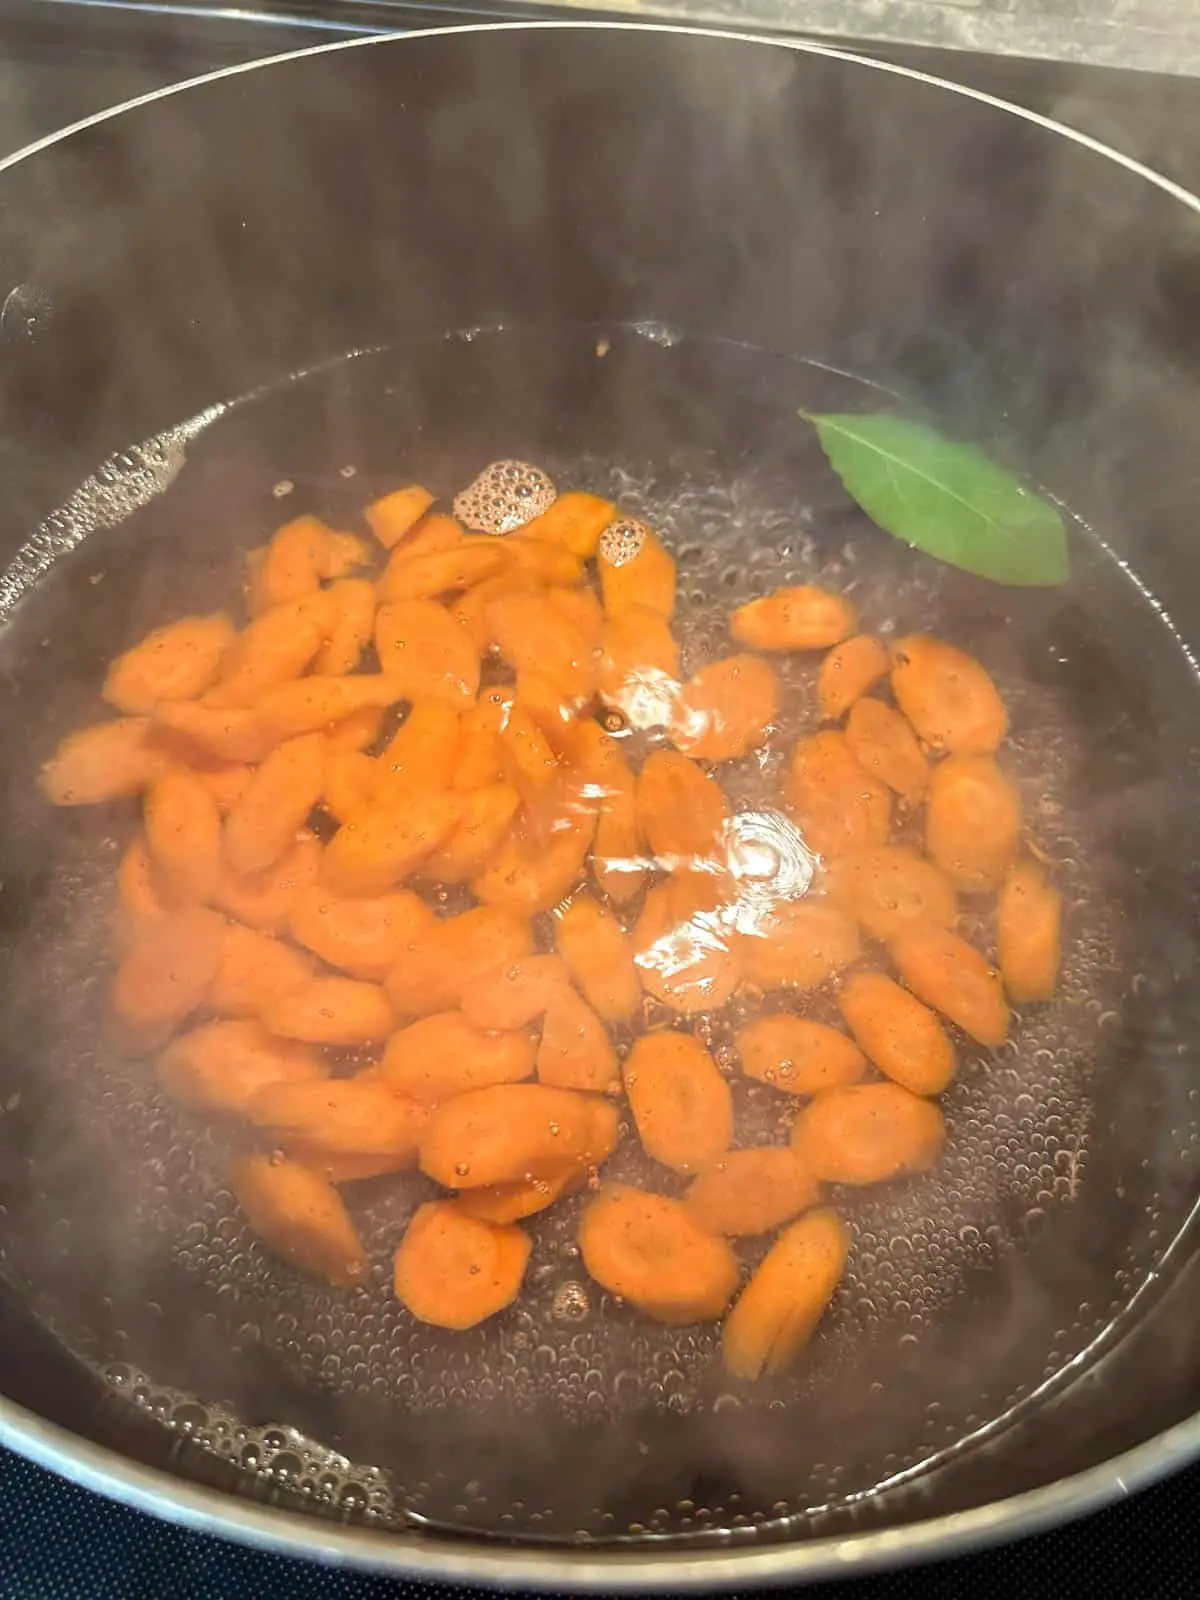 Sliced carrots and a bay leaf in a pot of boiling water.